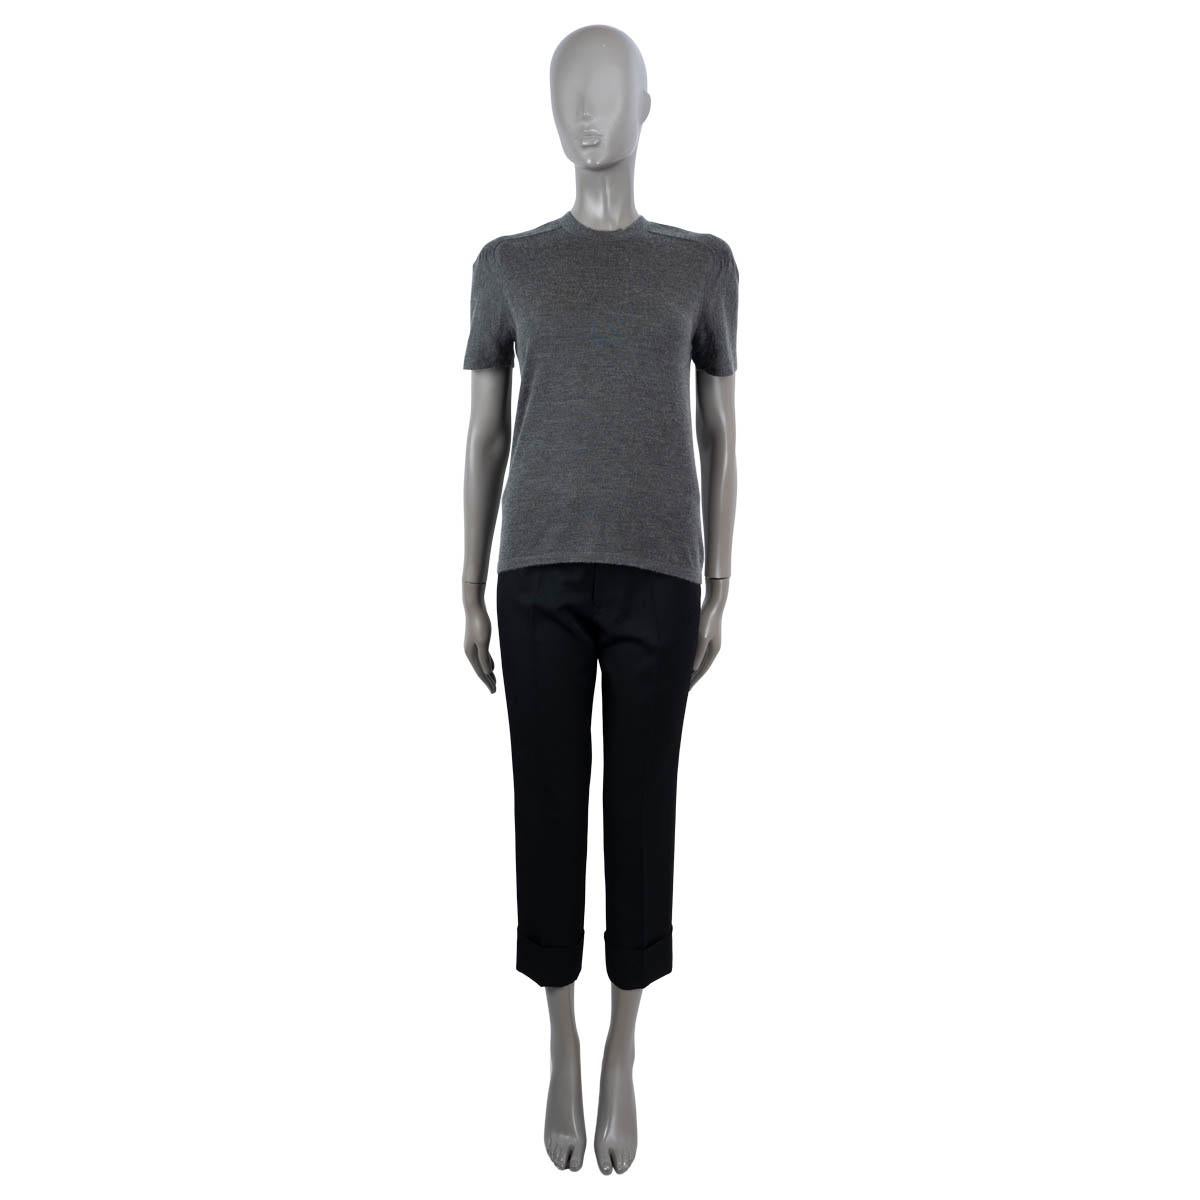 100% authentic Gabriela Hearst knit T-shirt in dark grey cashmere (70%) and silk (30%). Featrues a crewneck and rib detailing on the shoulders. Has been worn and is in excellent condition.

2019 Resort

Measurements
Tag Size	S
Size	S
Shoulder